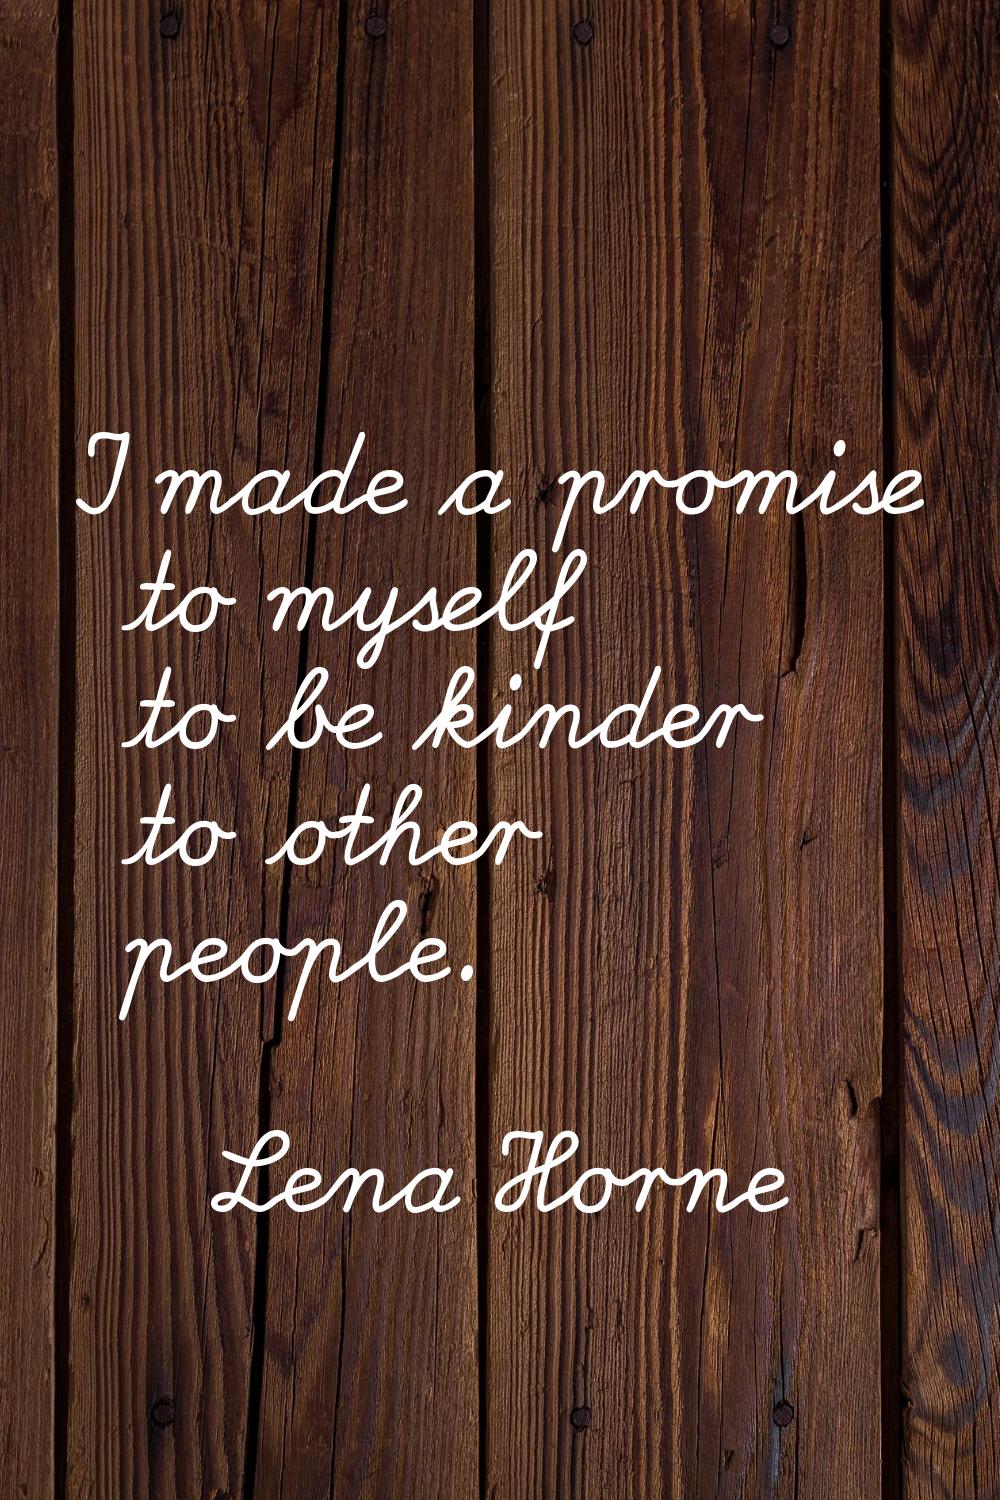 I made a promise to myself to be kinder to other people.